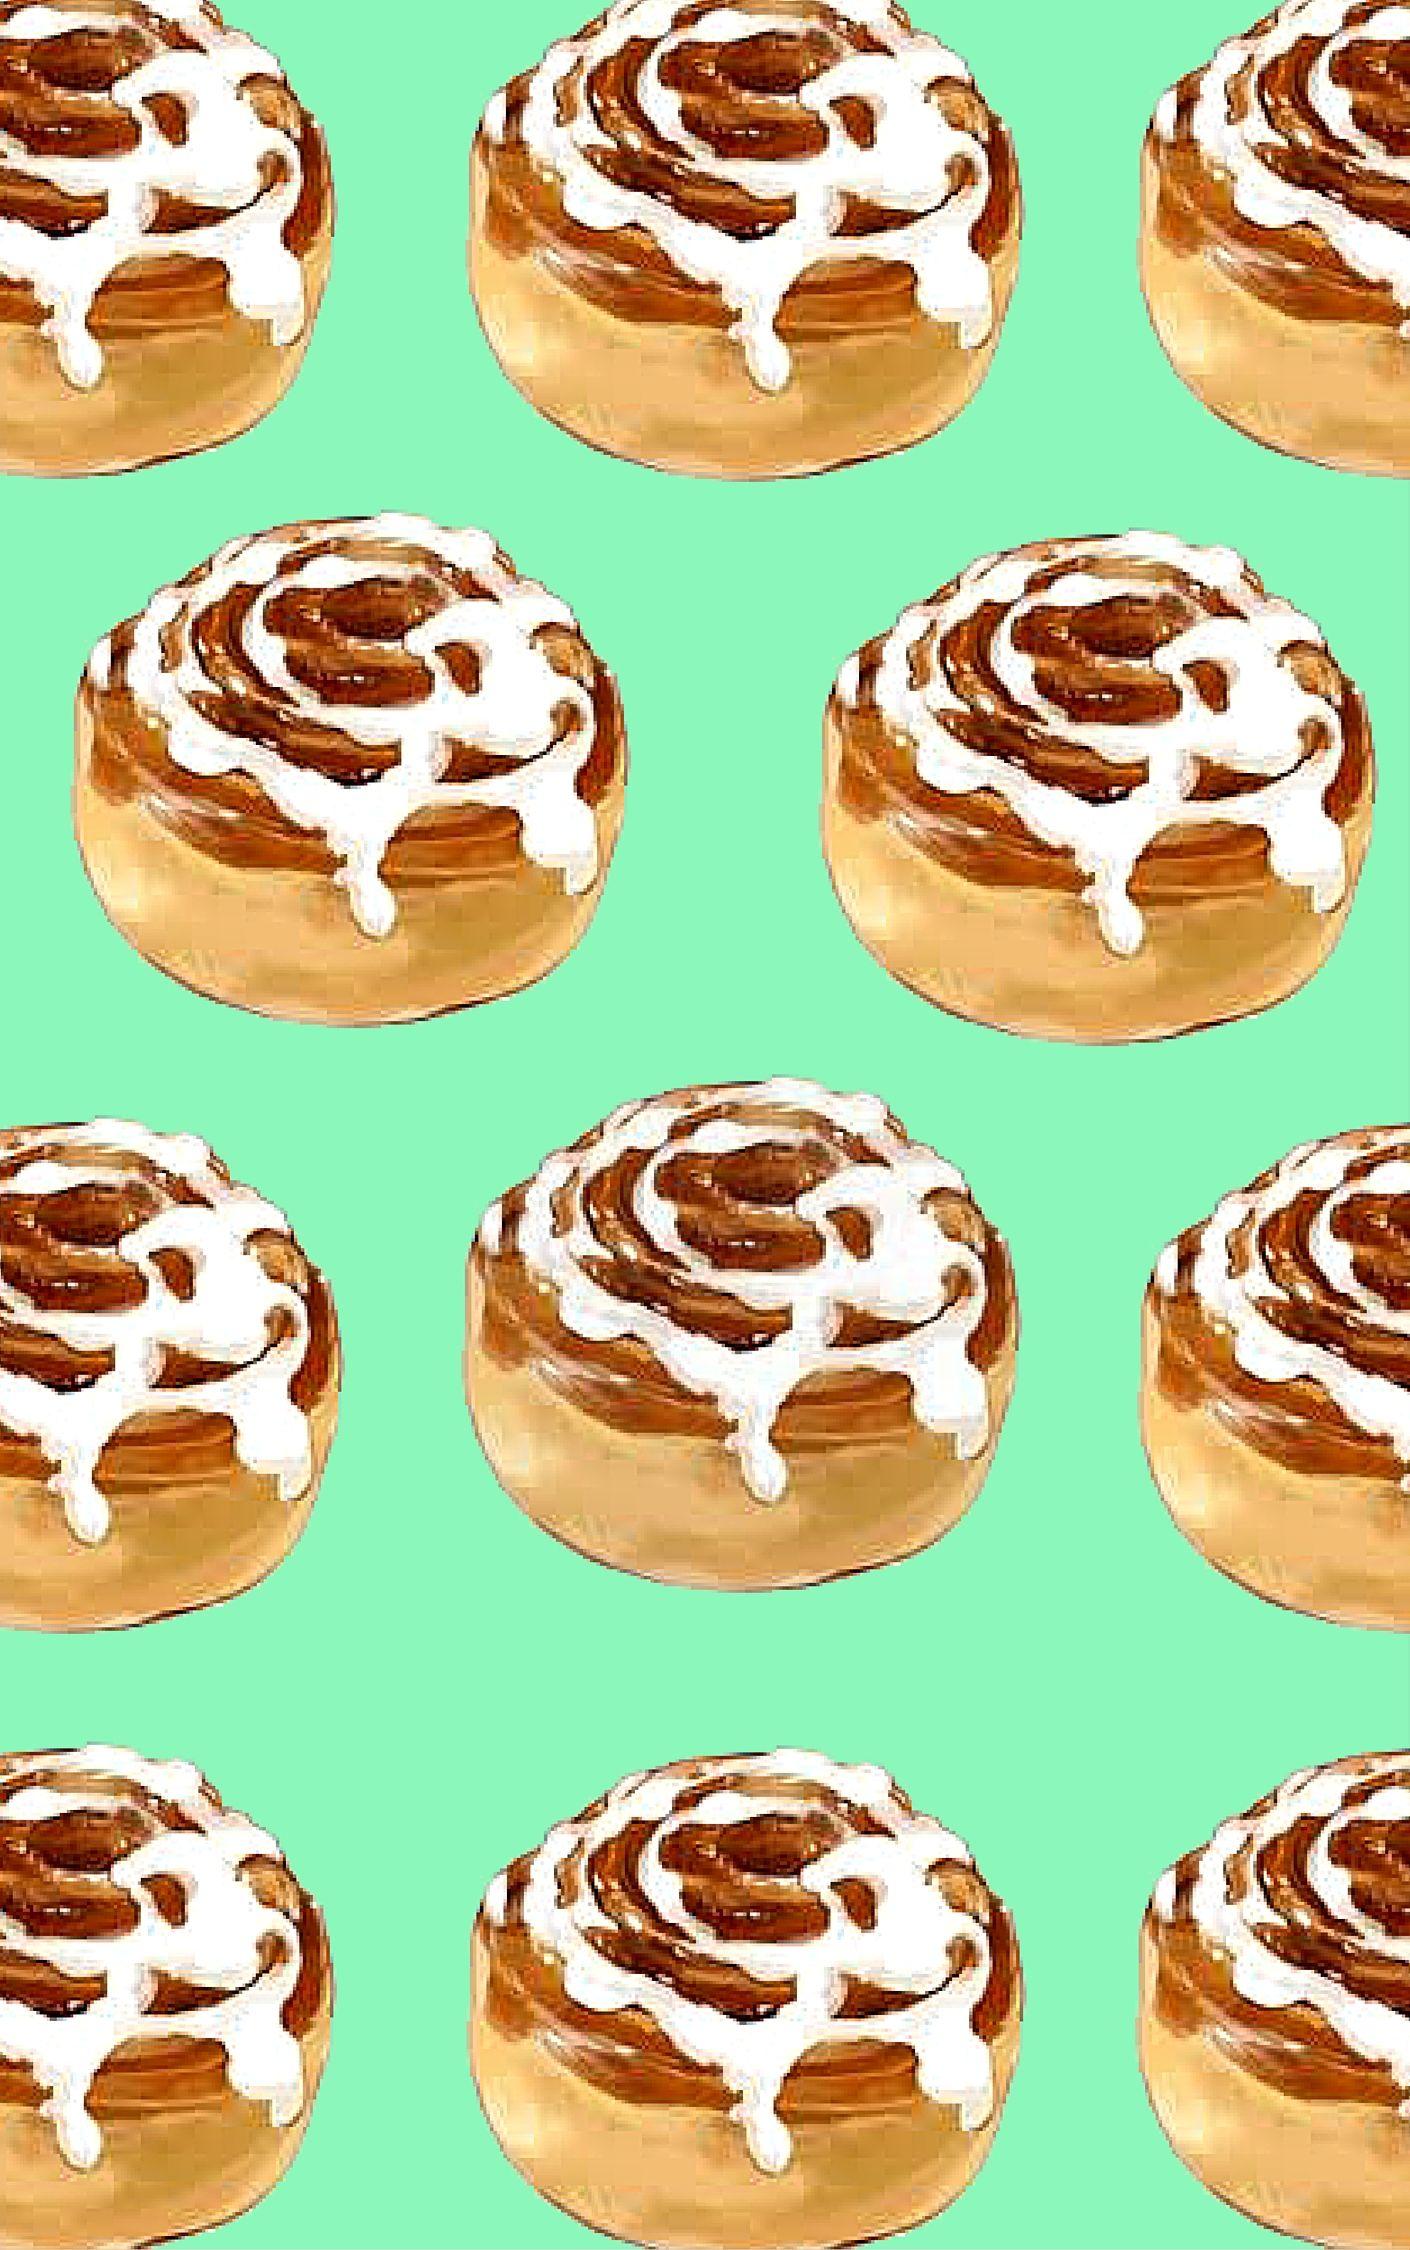  Be Positive   Cinnamonroll wallpaper by me I only made one